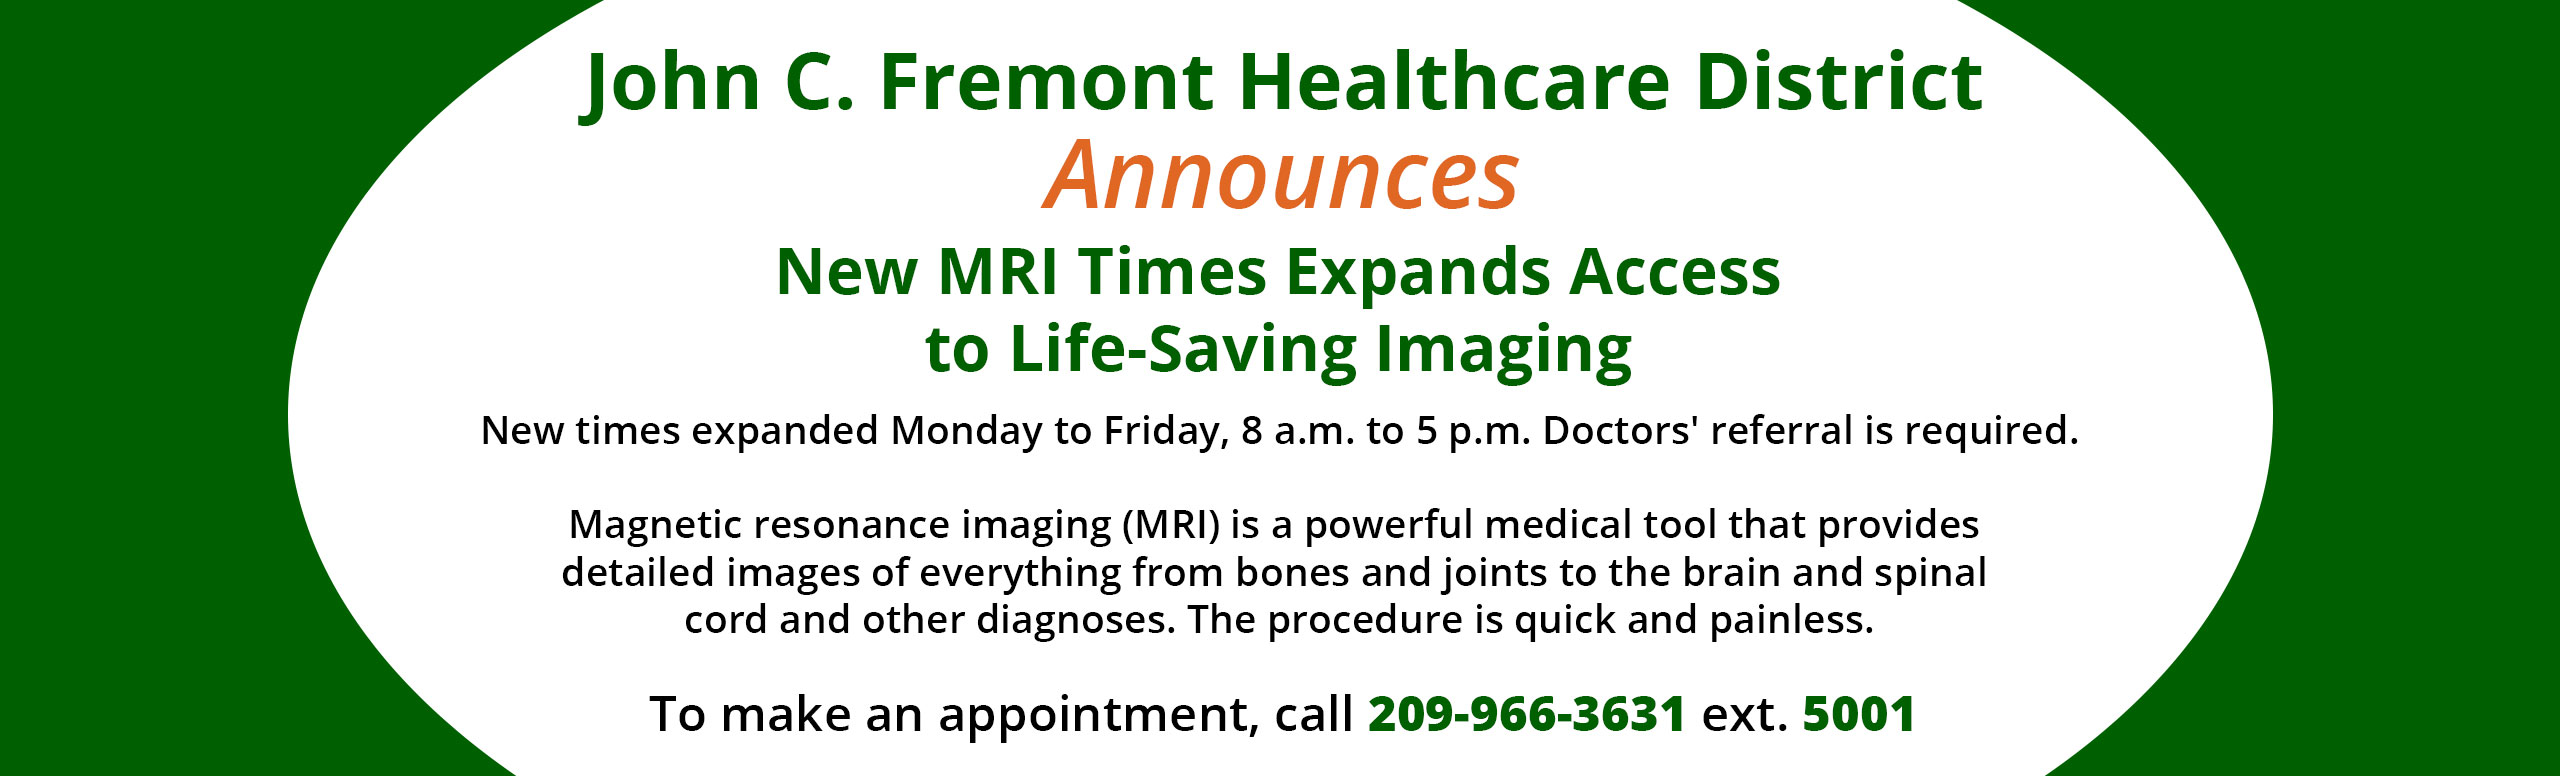 Banner picture of a CT Scan. Banner says:

John C. Fremont Healthcare District Announces New MRI Times Expands Access to Life-Saving Imaging
New times expanded Monday to Friday, 8 a.m. to 5 p.m. Doctor's referral is required.

Magnetic resonance imaging (MRI) is a powerful medical tool that provides detailed images of everything from bones and joints to the brain and spinal cord and other diagnoses. The procedure is quick and painless. 

To make an appointment, call 209-966-3631 ext. 5001